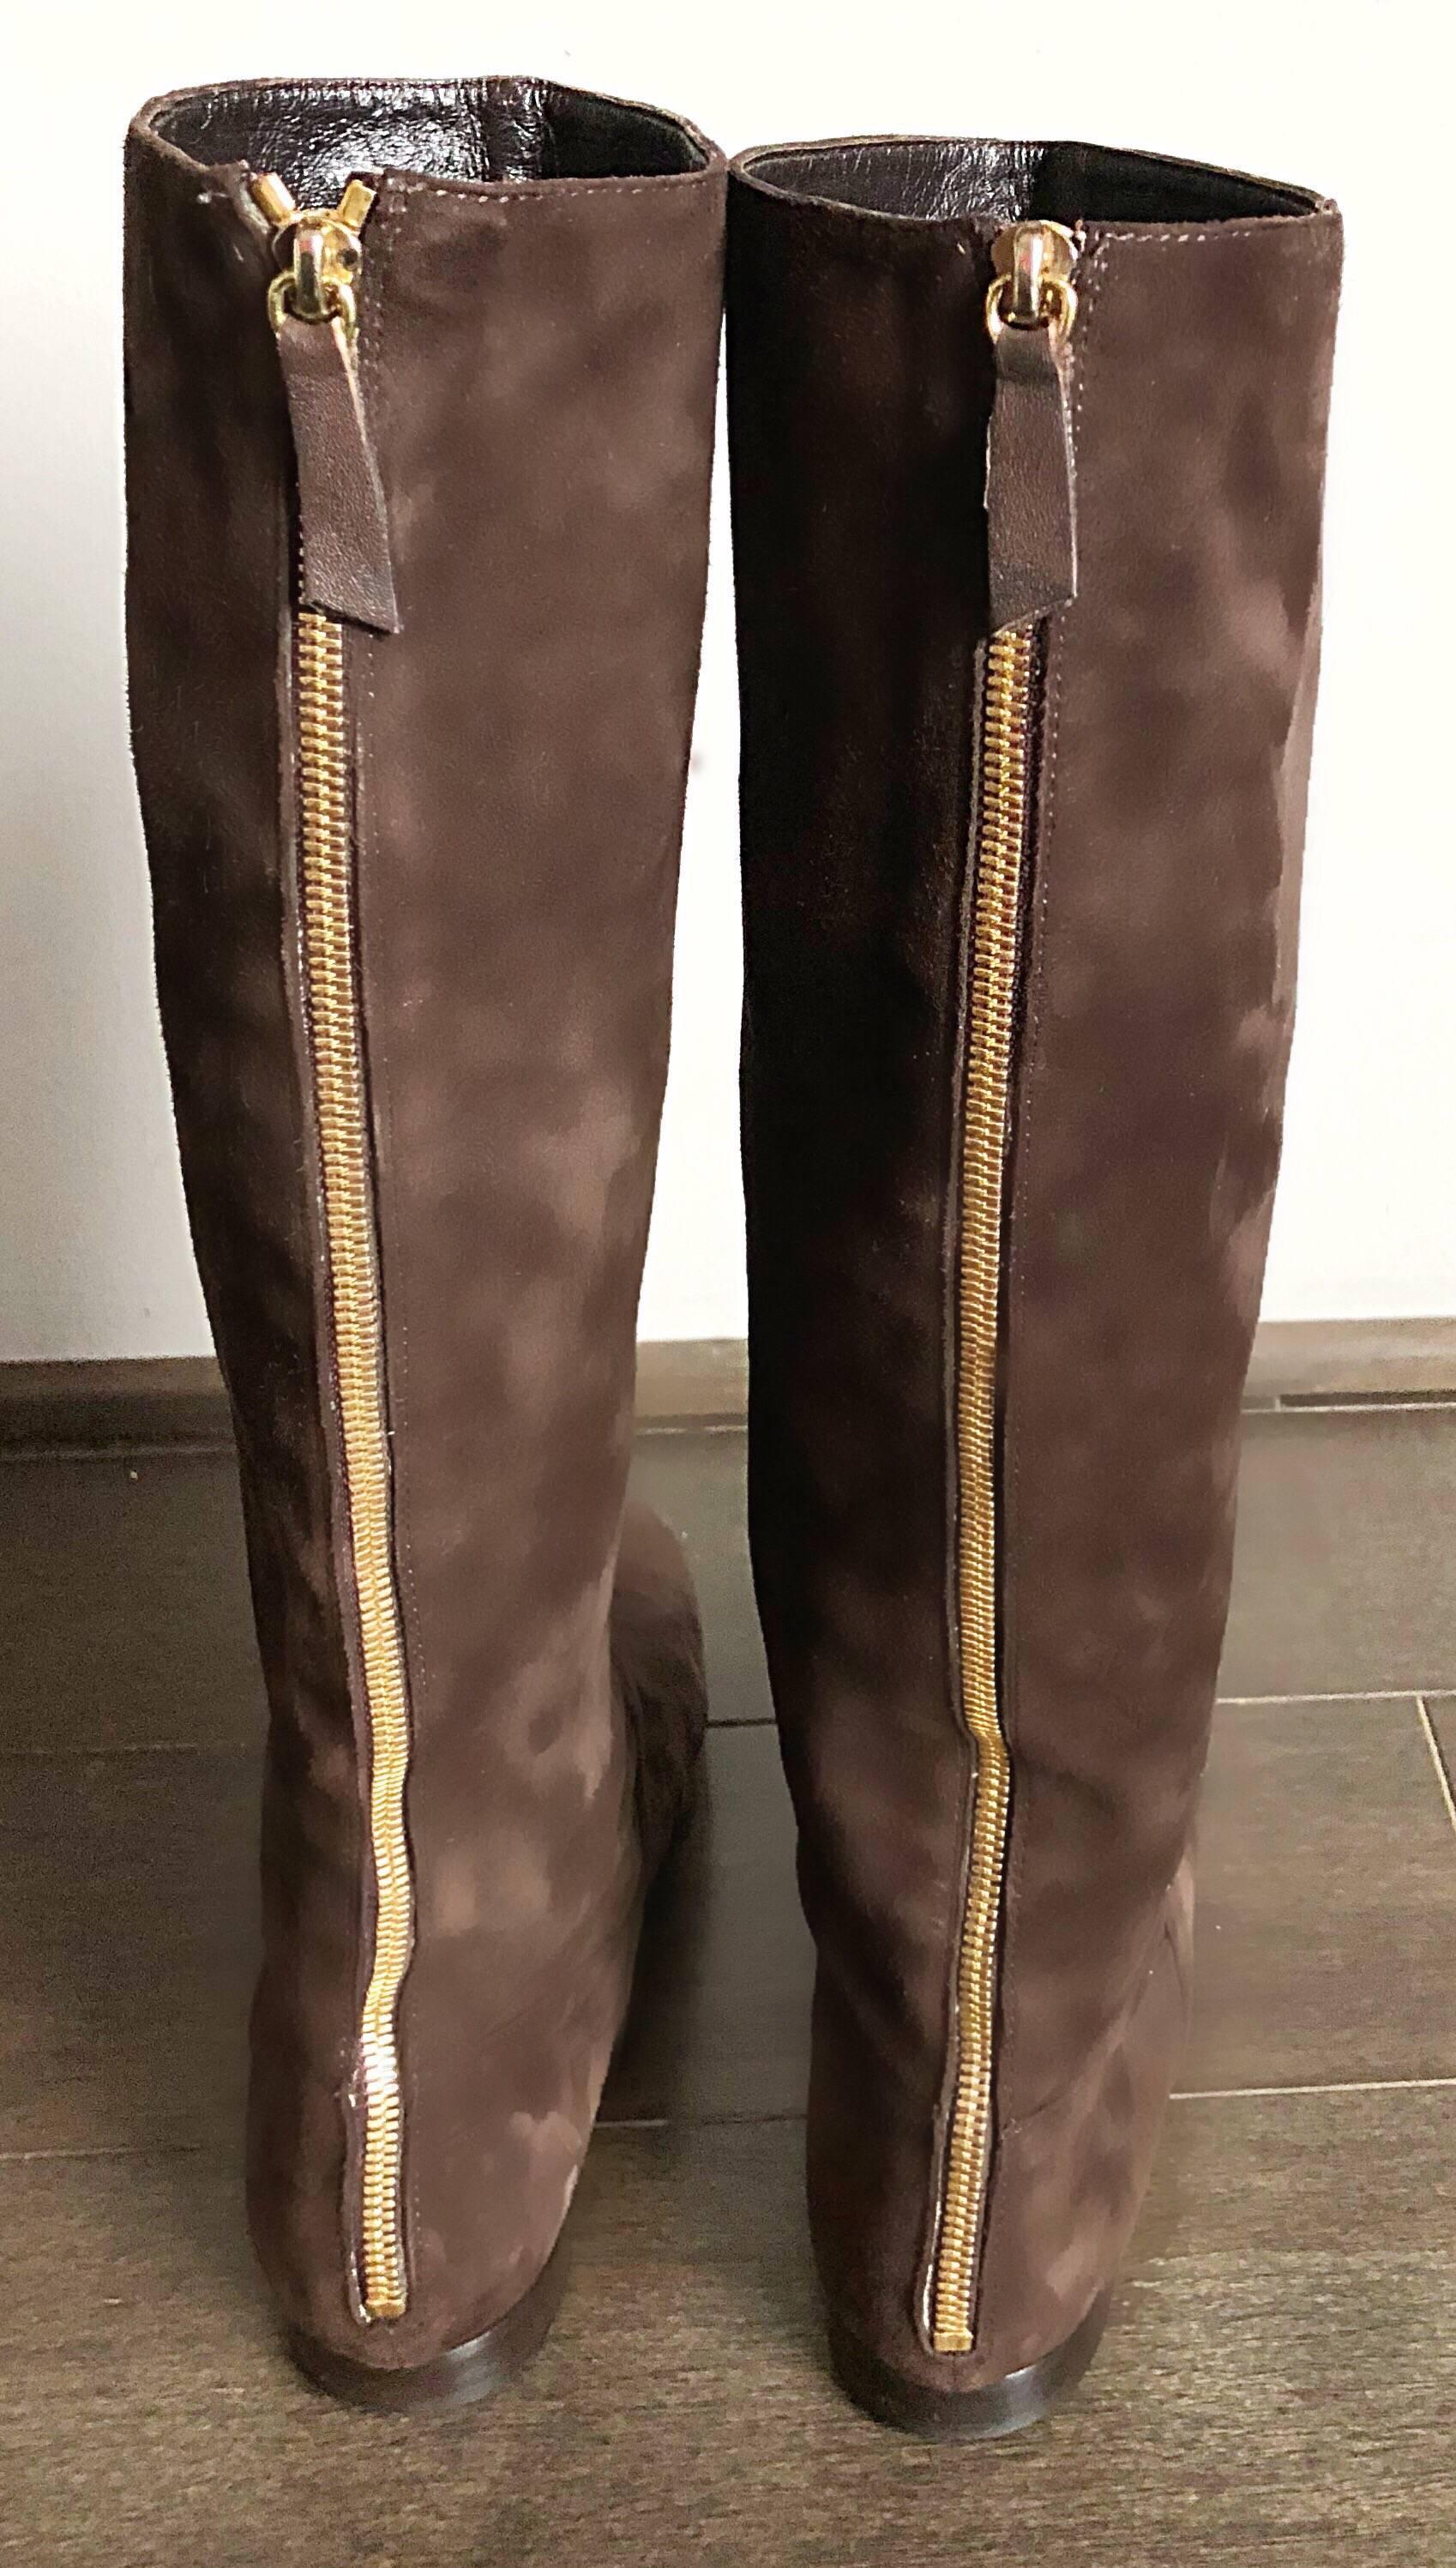 New 1990s Moschino Cheap & Chic Size 38.5 / 8.5 Brown Suede 90s Knee High Boots In New Condition For Sale In San Diego, CA